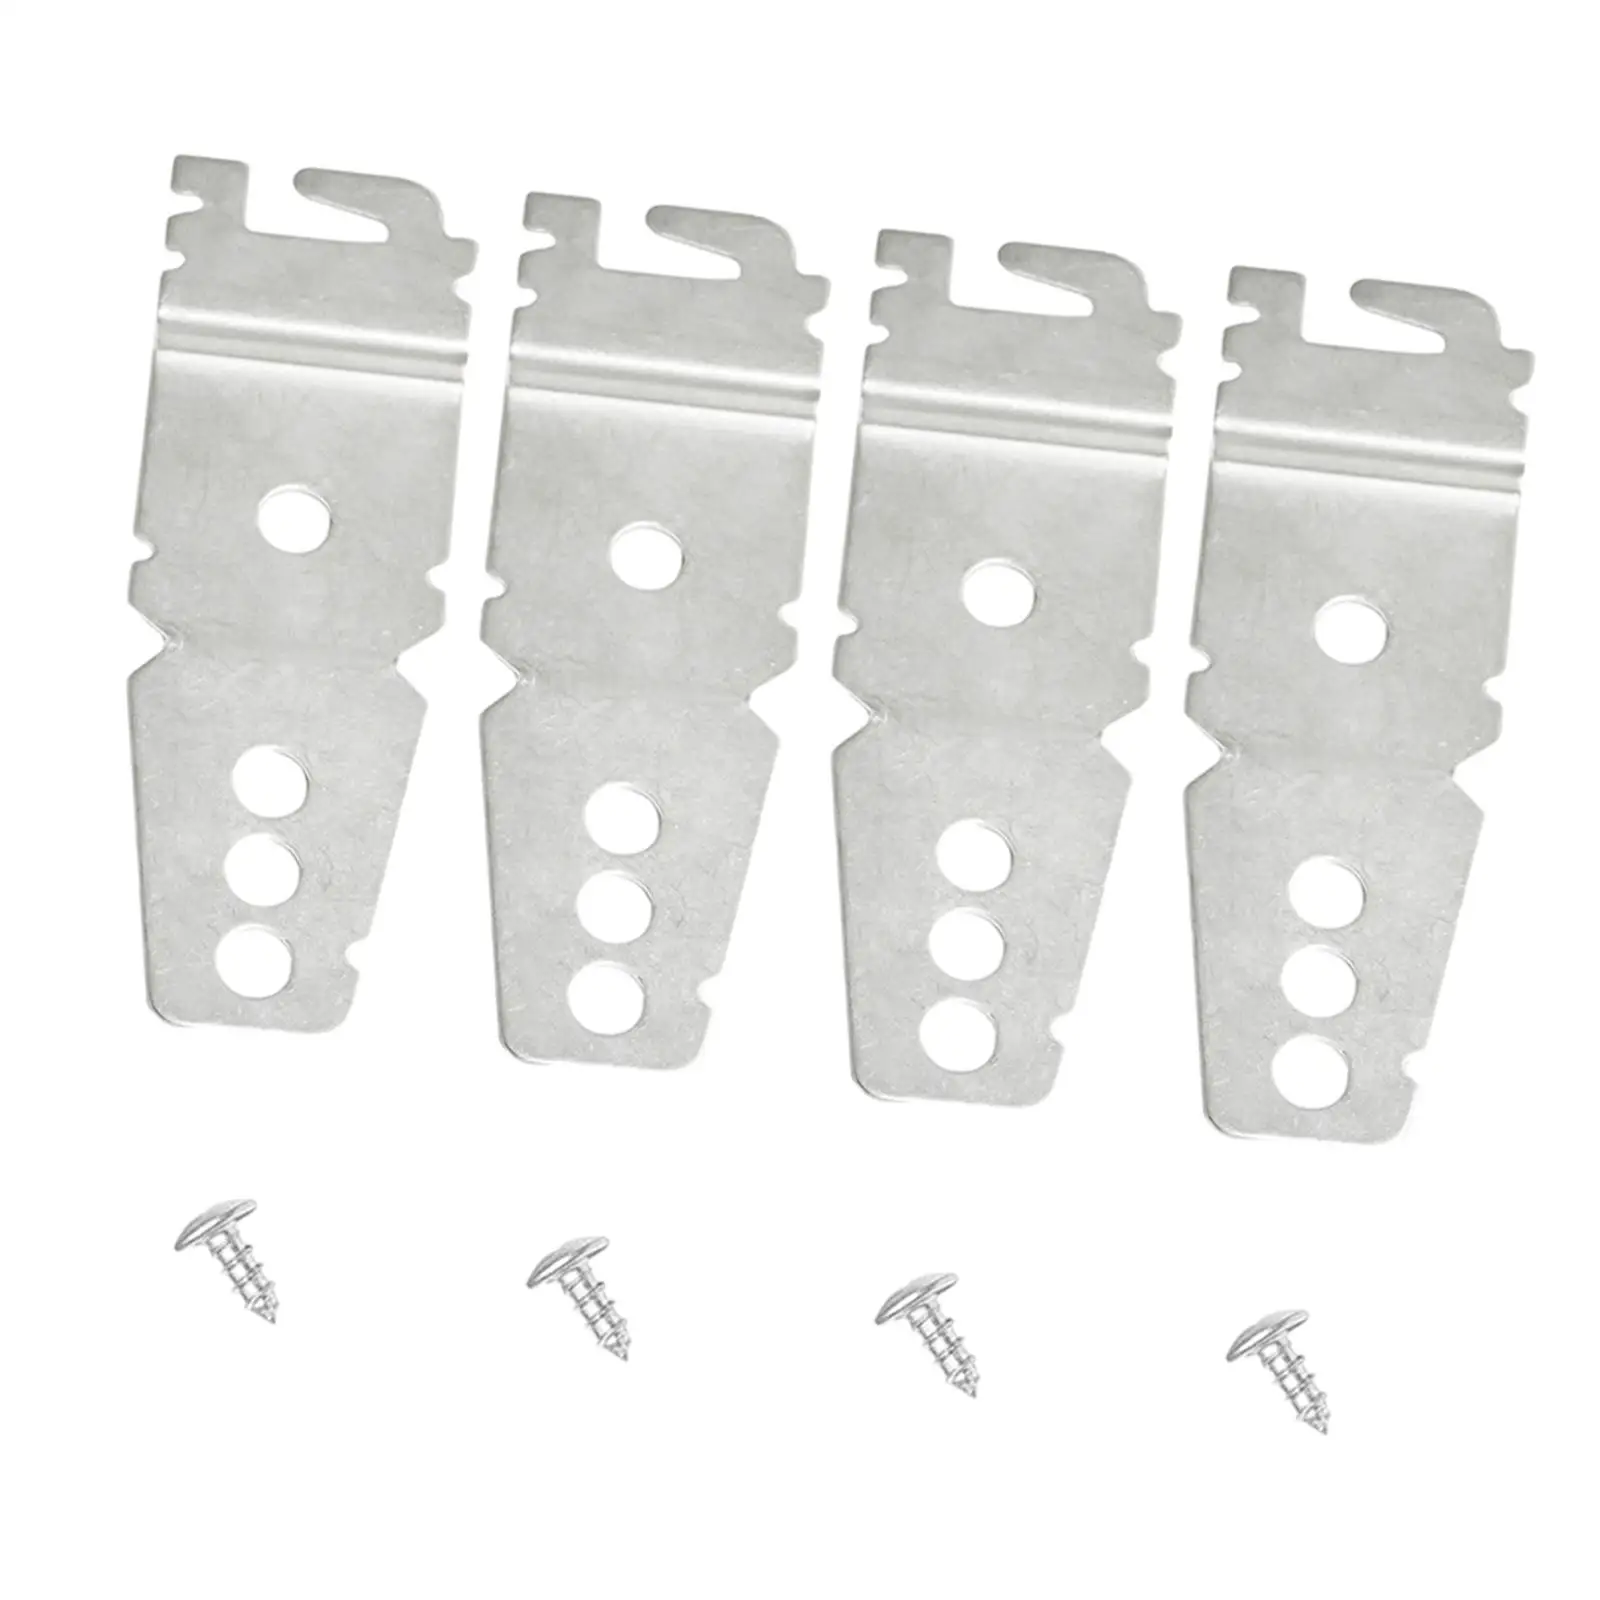 4Pcs 8269145 Dishwasher Mounting Bracket Stable Performance Parts Rustproof Accessories for WP8269145 PS393134 AP3039168